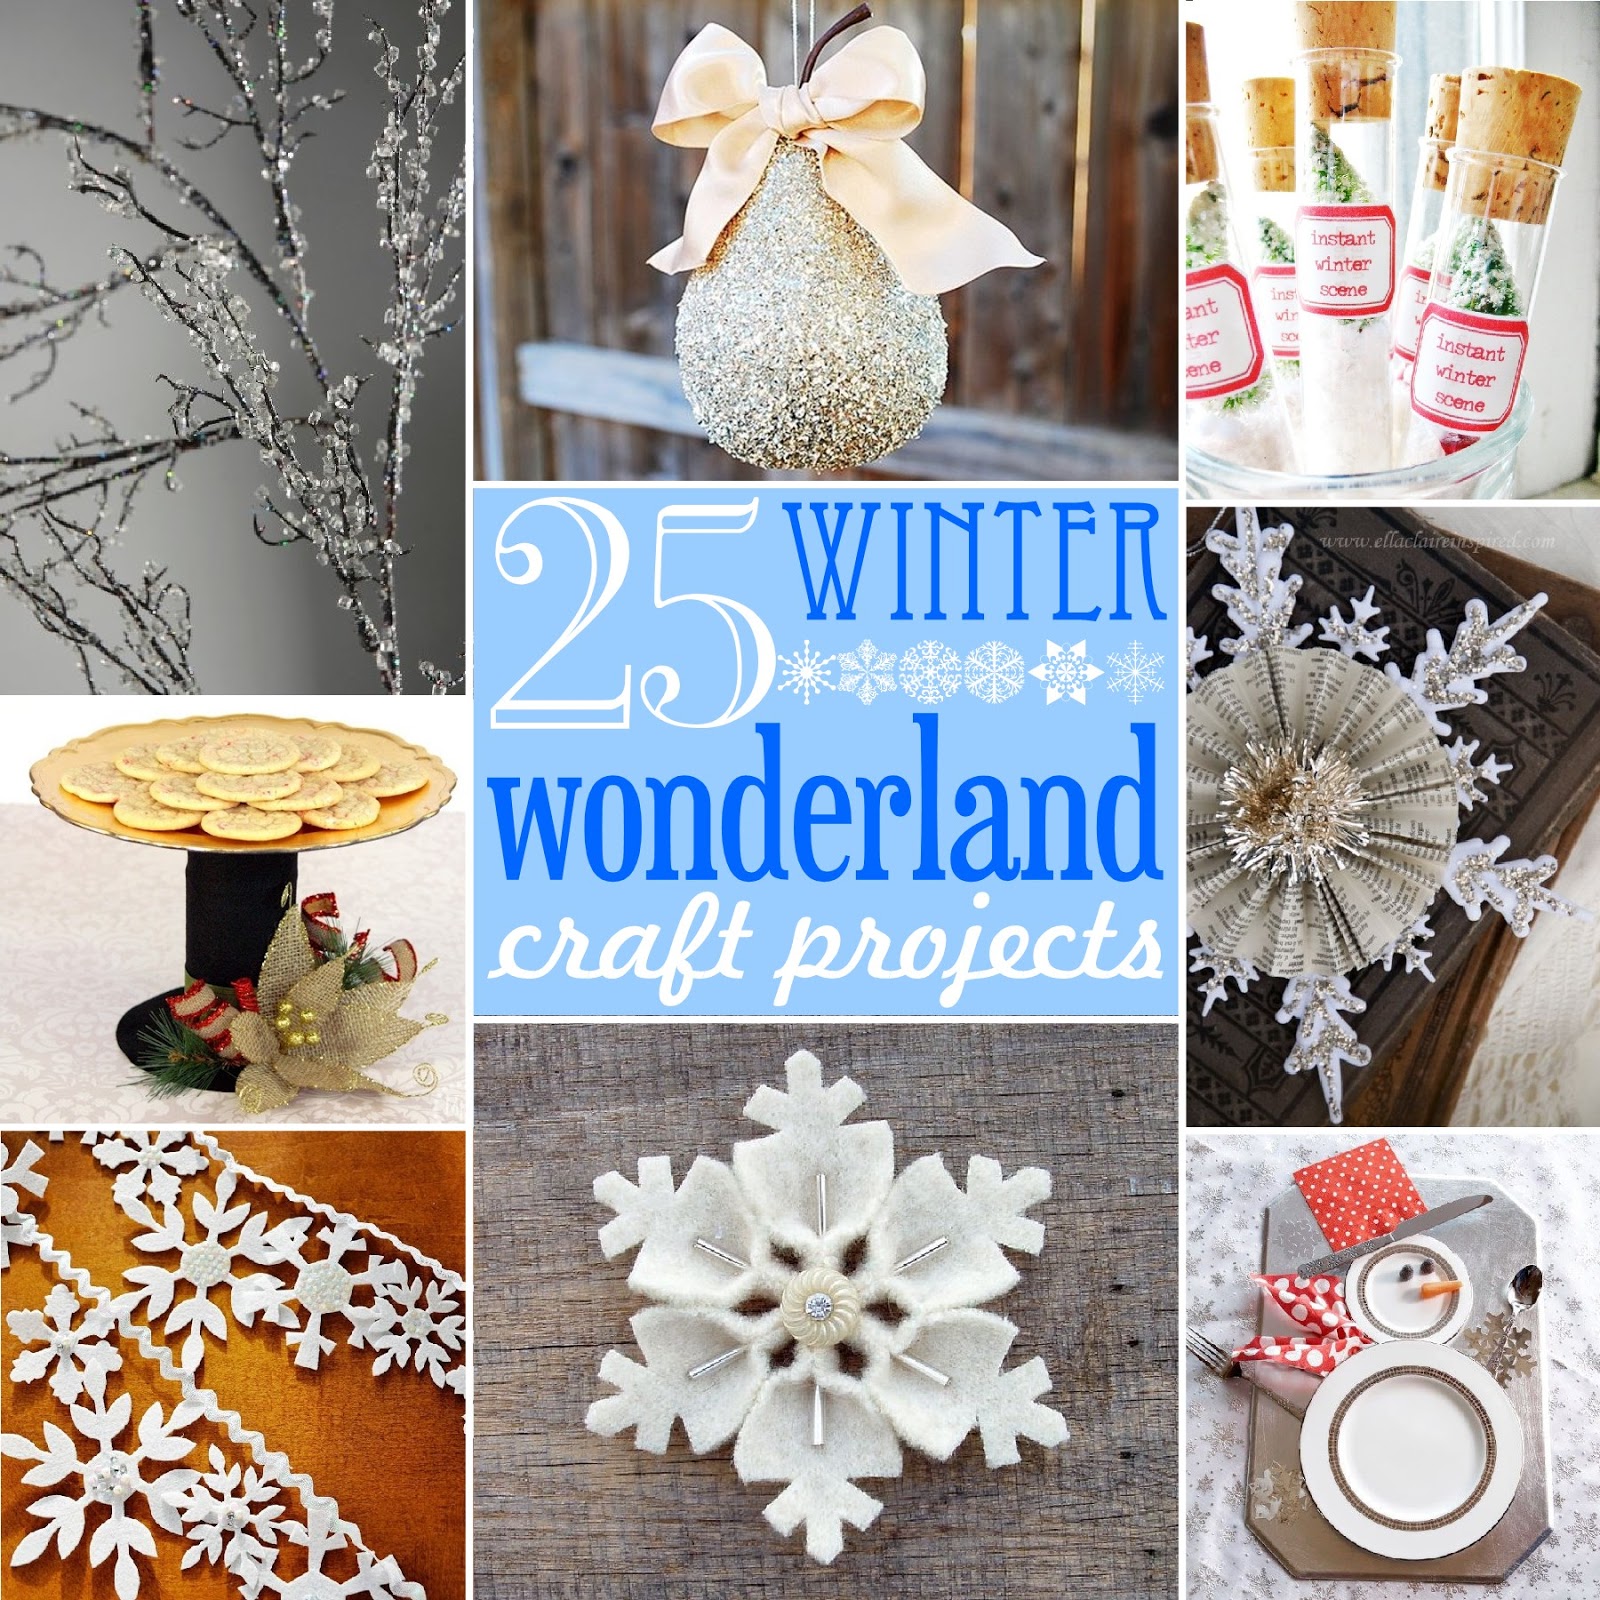 DIY Snowman Decorations: Create a Winter Wonderland with These Simple Crafts